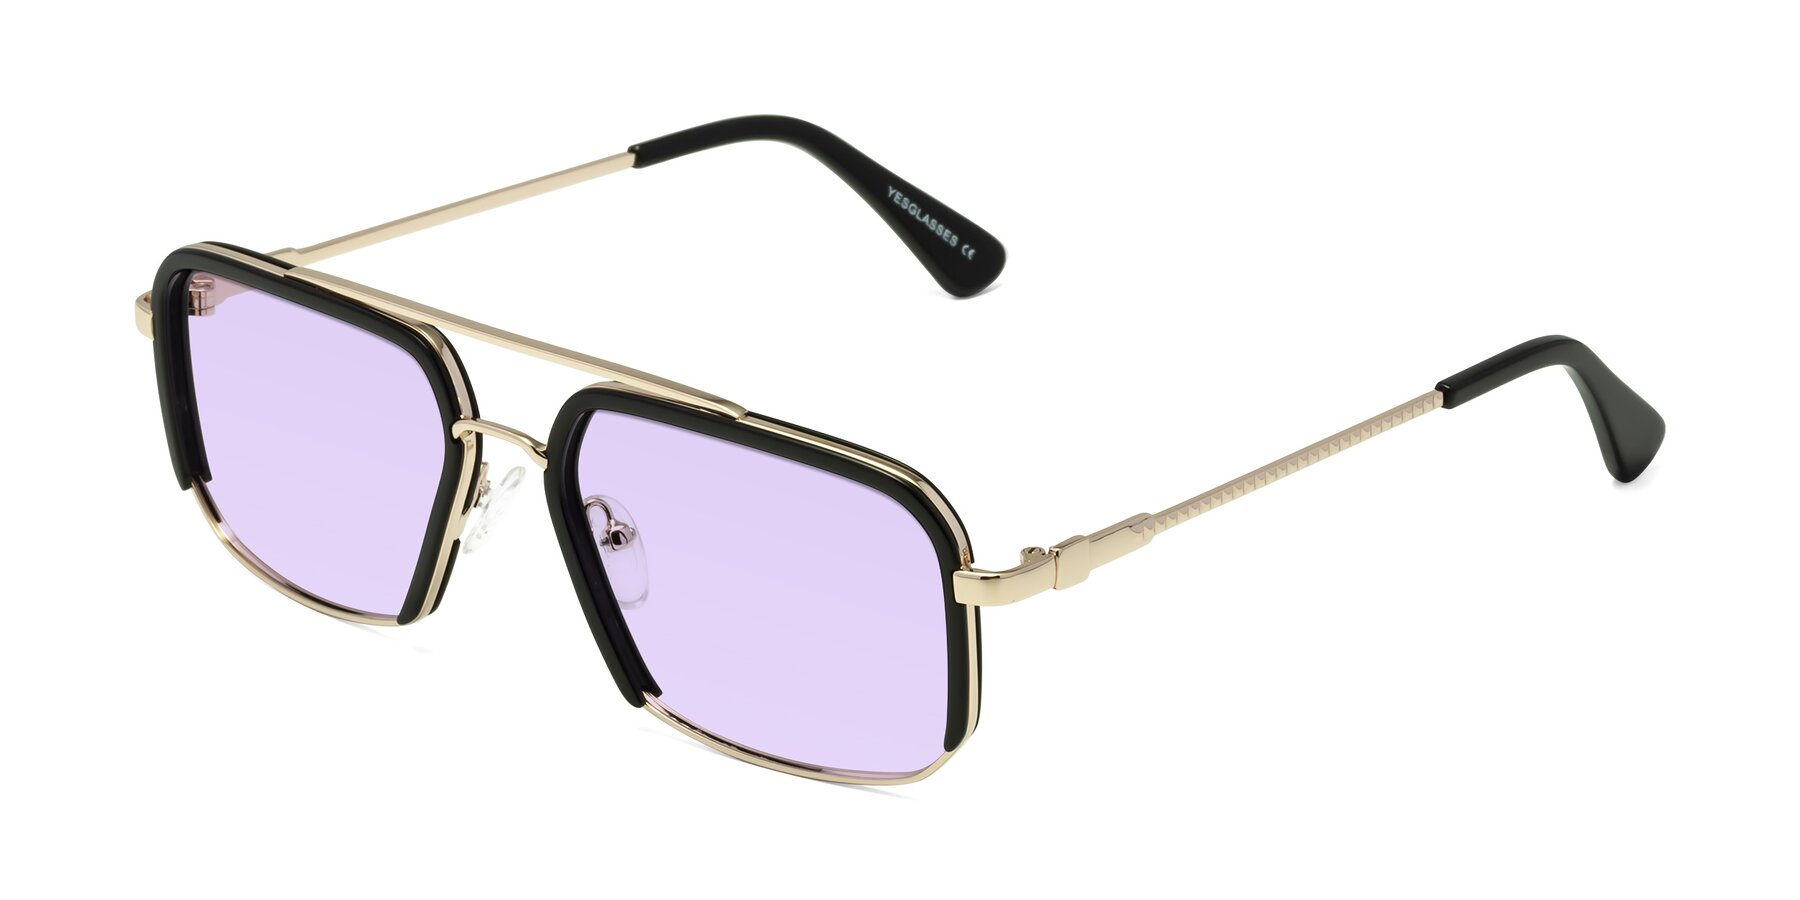 Angle of Dechter in Black-Gold with Light Purple Tinted Lenses